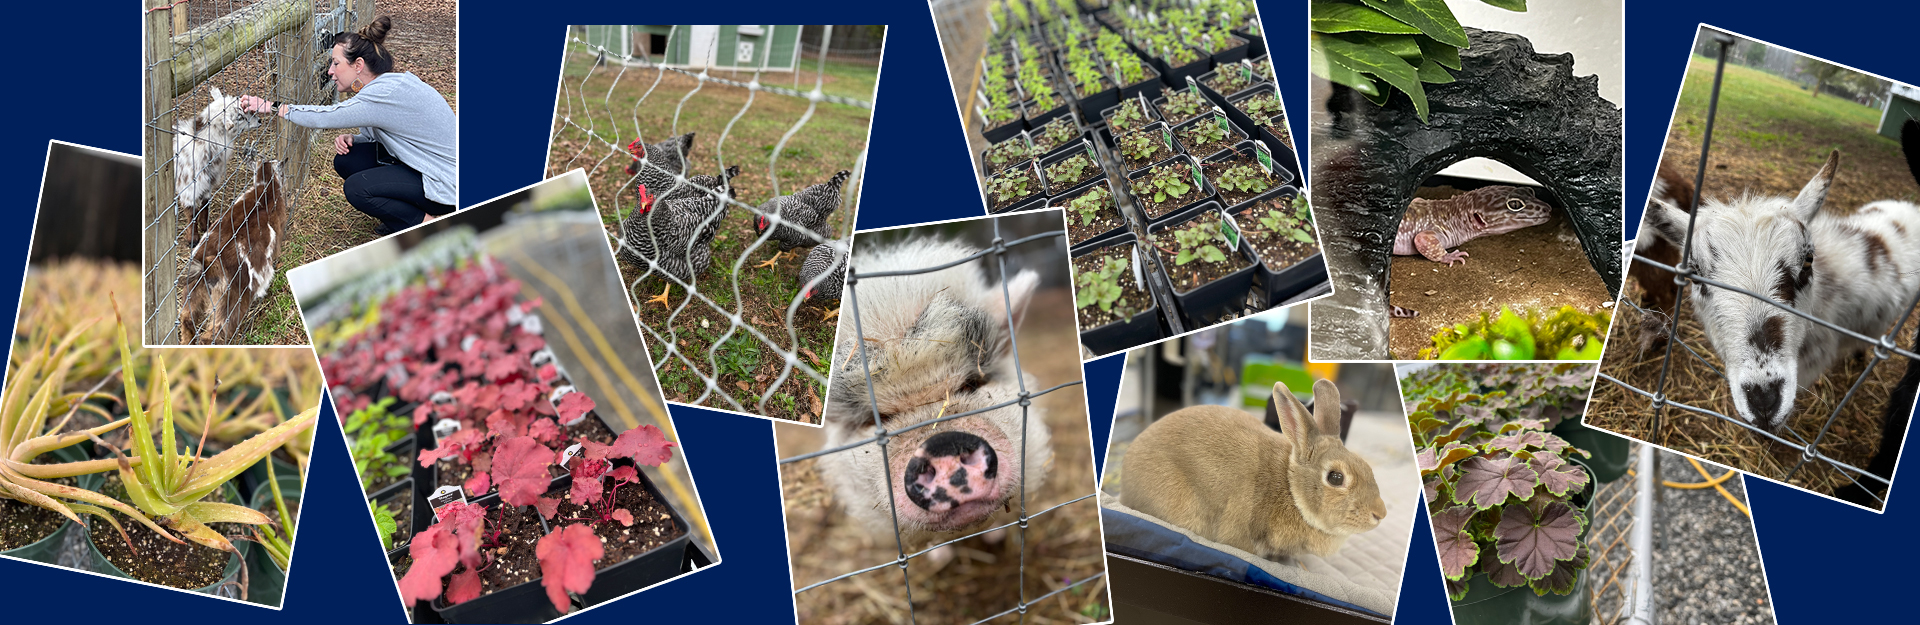 collage of images representing agricultural education subject-matter, chicken, pig, goat, rabbit and plants 